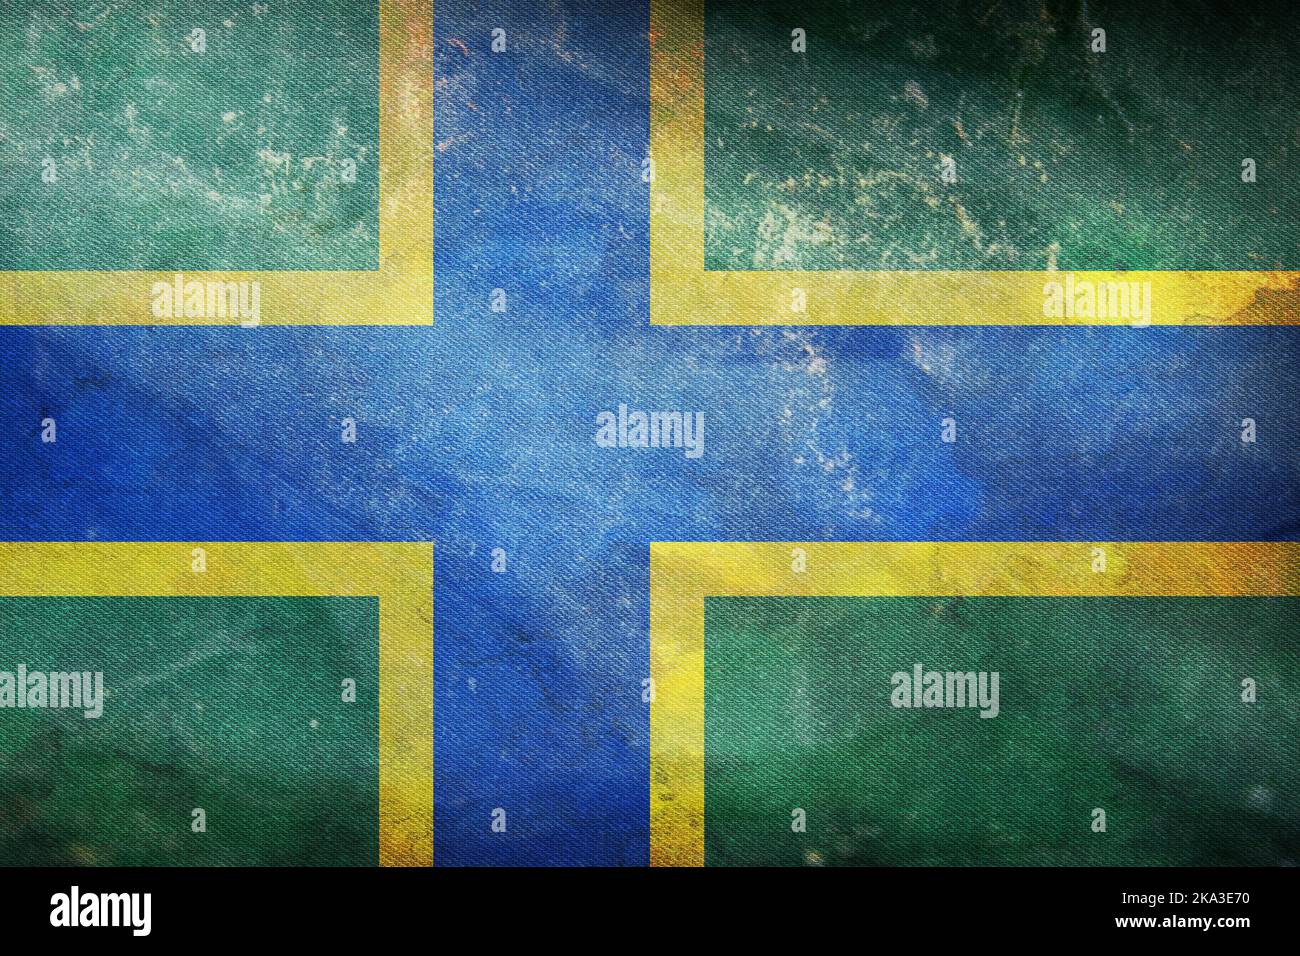 retro flag of Baltic Finns Vepsians with grunge texture. flag representing ethnic group or culture, regional authorities. no flagpole. Plane design, l Stock Photo